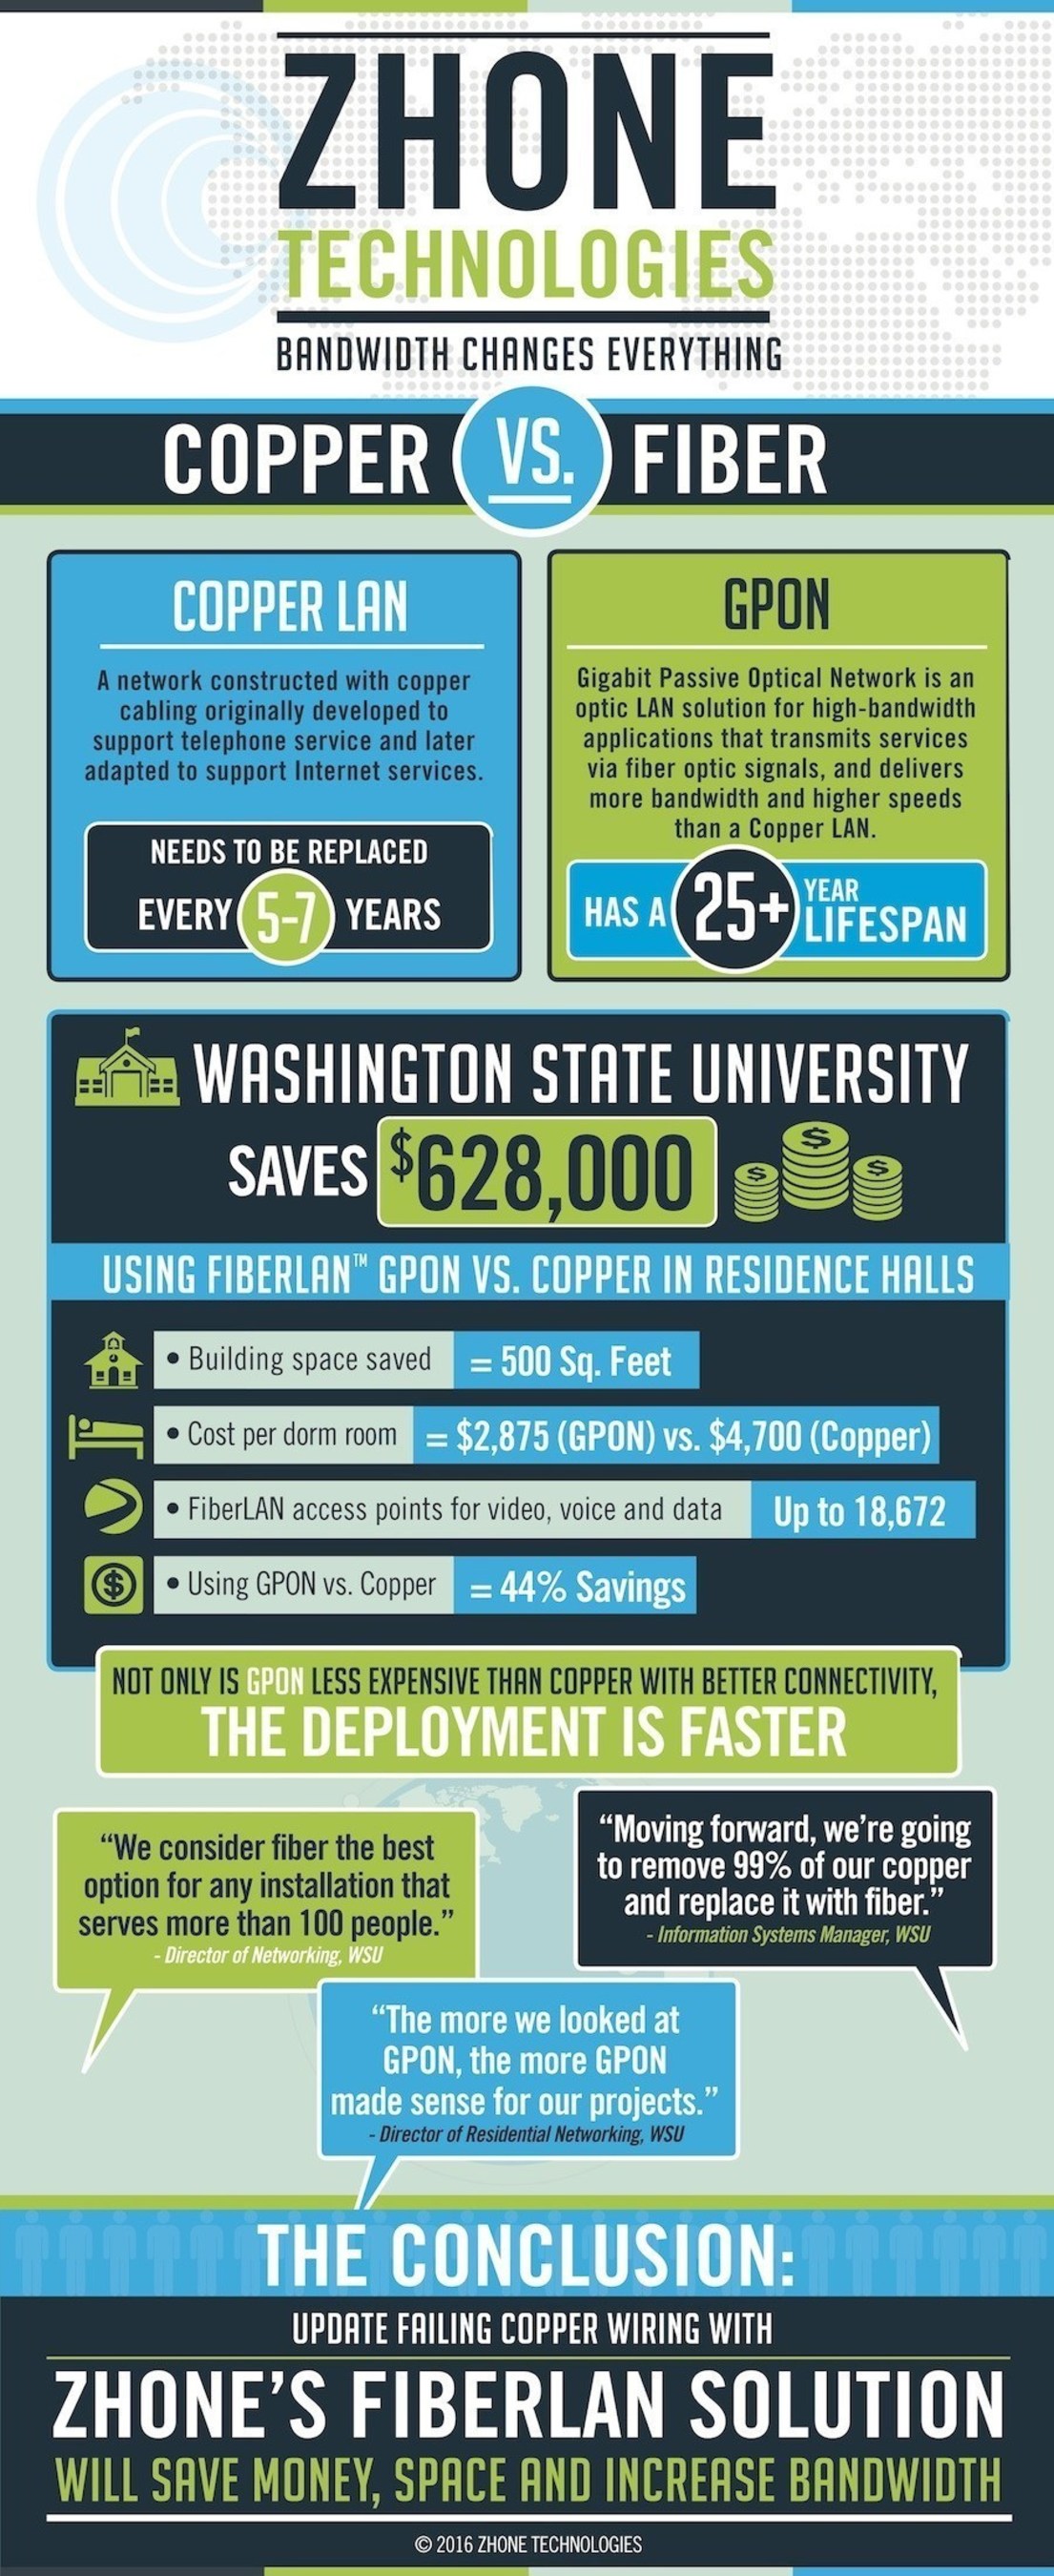 Washington State University saved $628,000, among other benefits illustrated in this infographic, by using GPON versus Copper LAN in a campus residence hall.